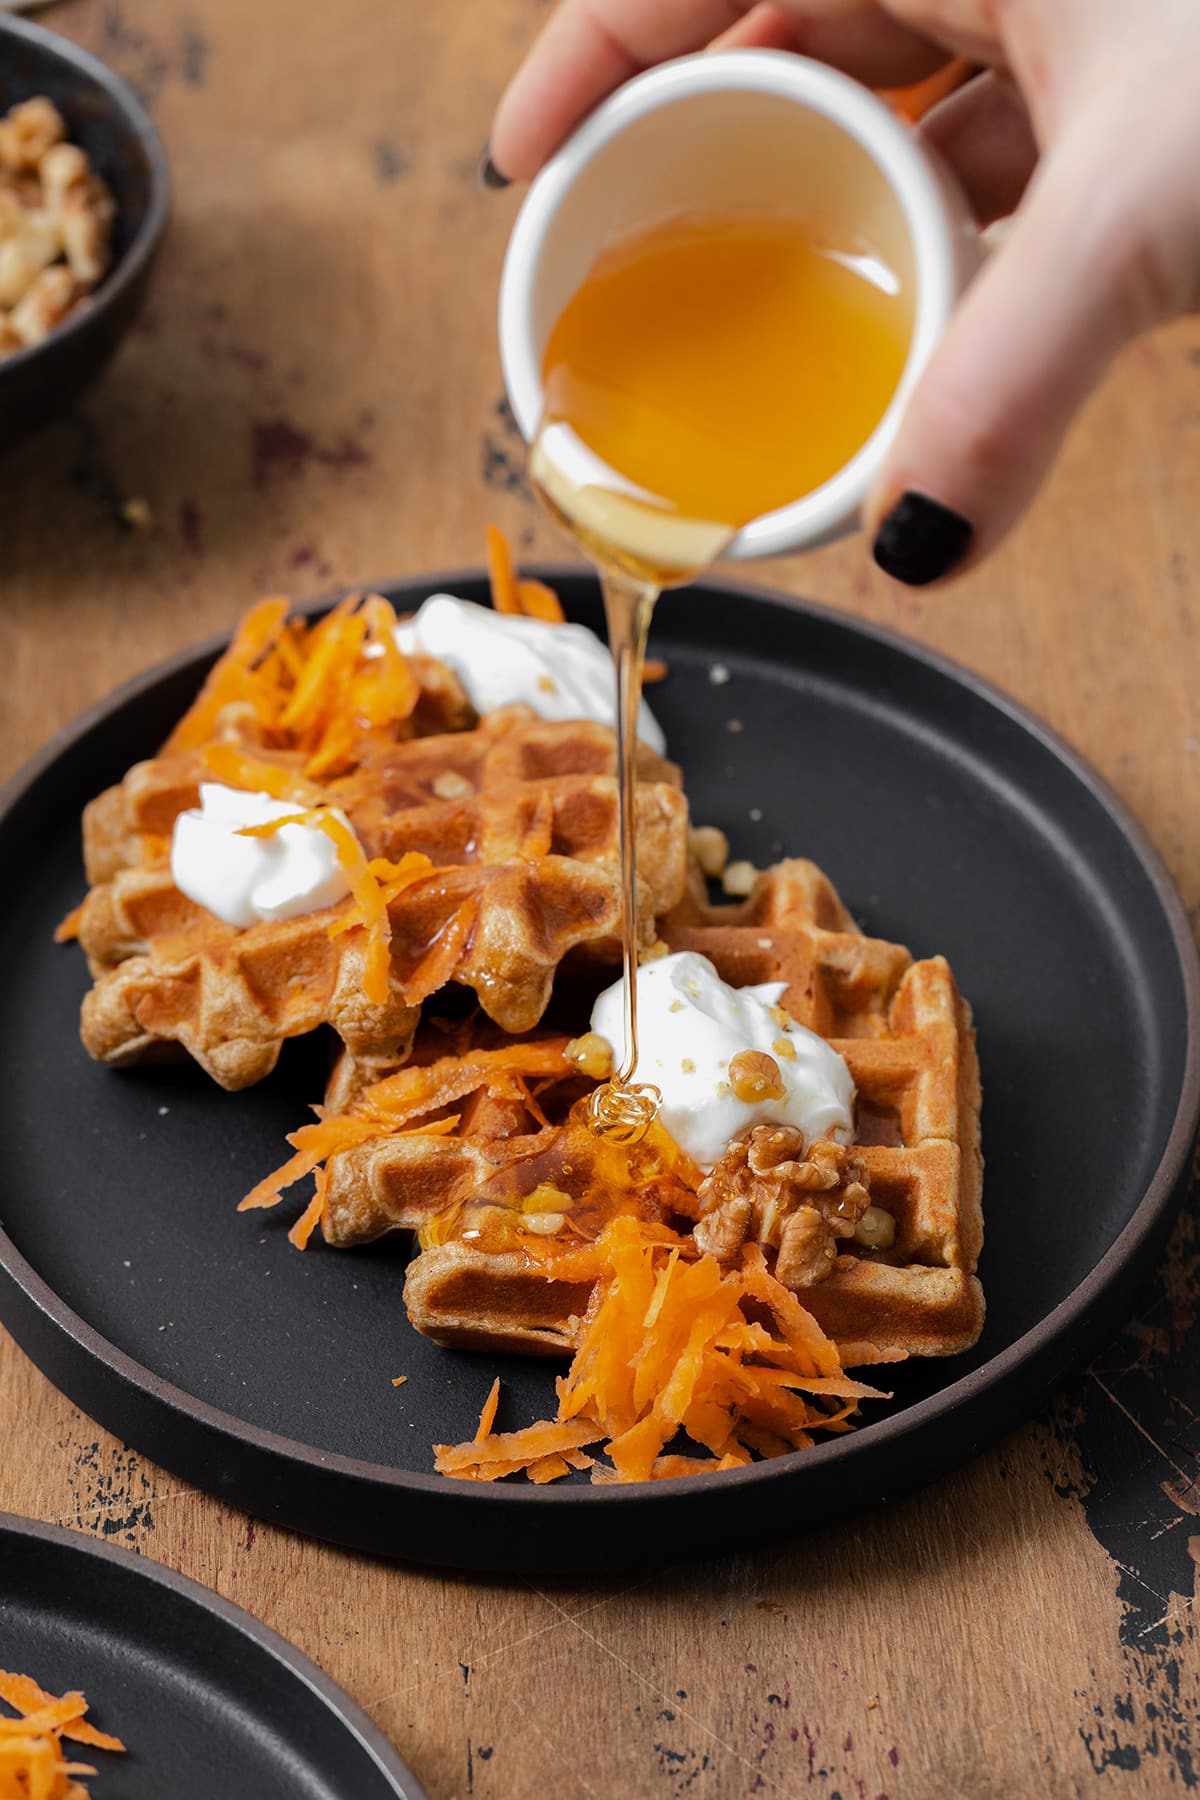 A photo of a hand holding a small bowl of honey and pouring it over two carrot cake waffles on a black plate topped with grated carrots, dollops of greek yogurt, and walnuts.